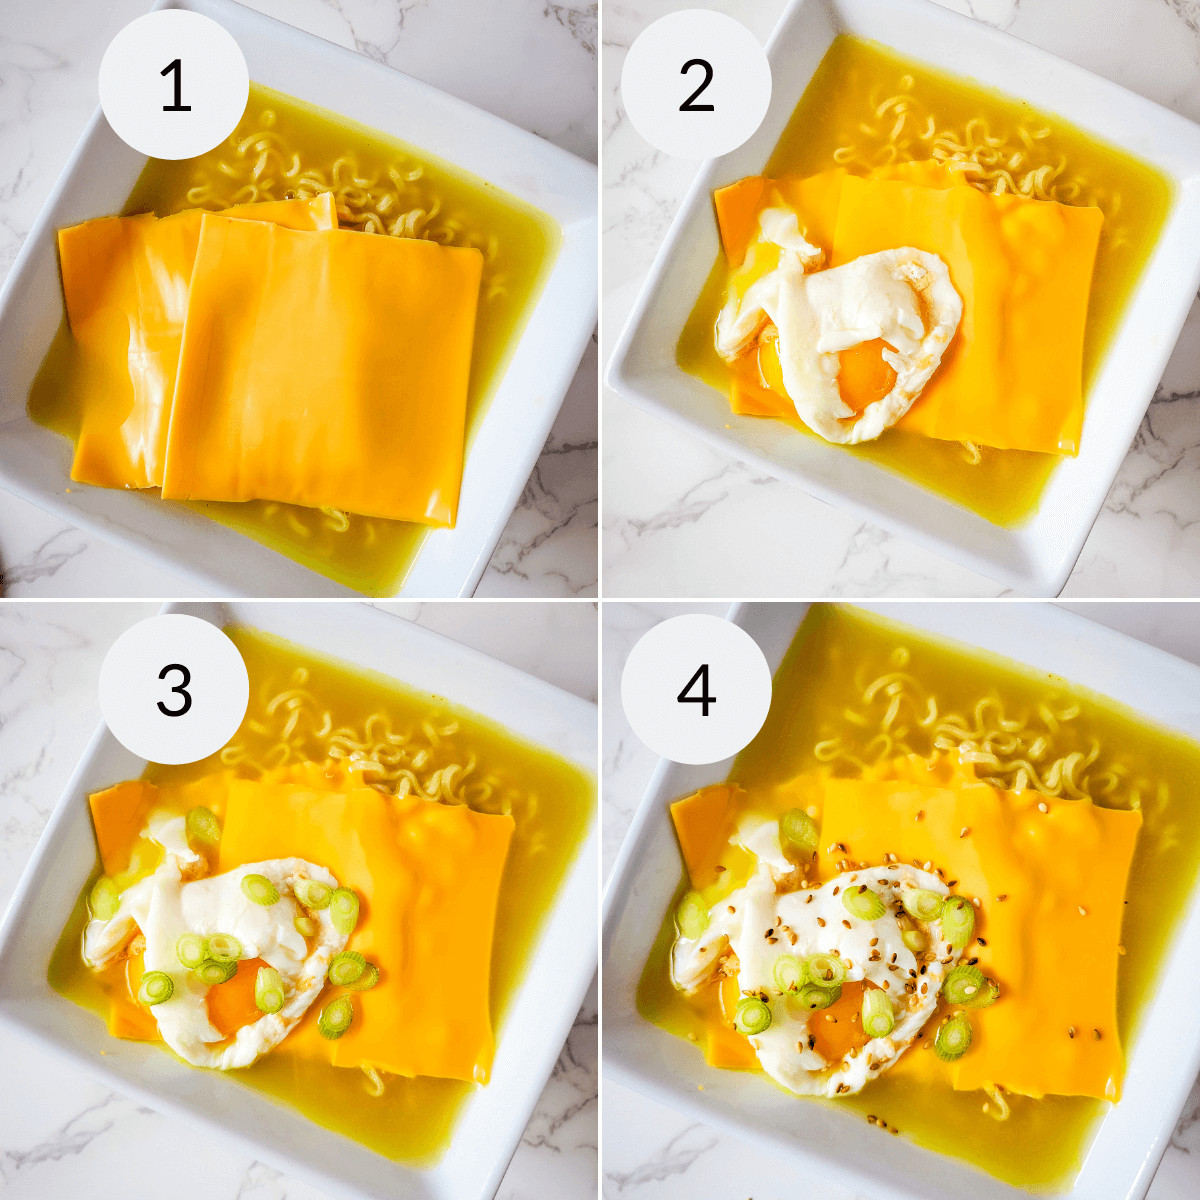 A series of pictures showing how to make a cheese noodle dish incorporating ramen and mac and cheese.